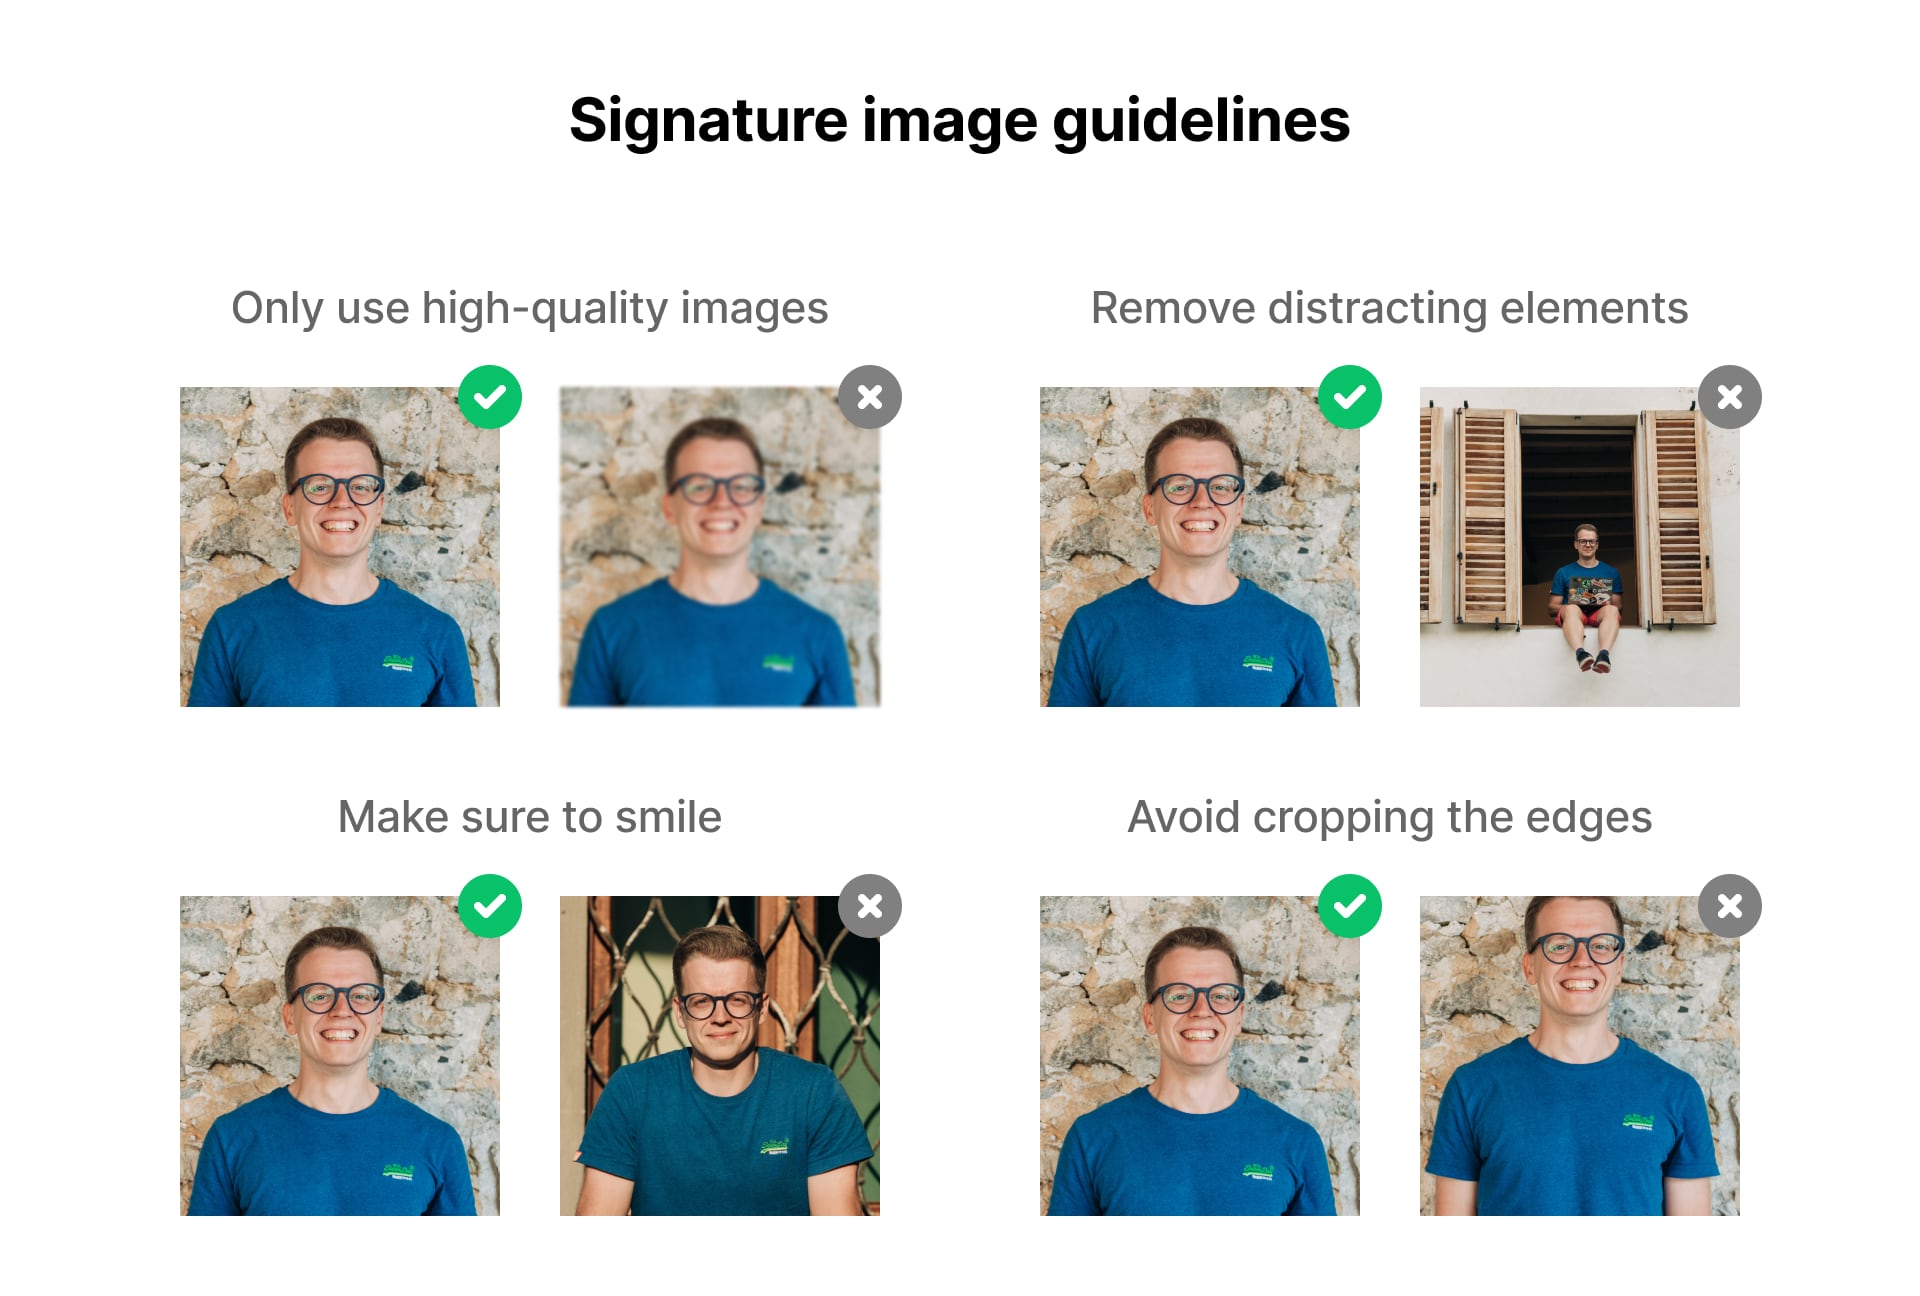 Email signature image guidelines